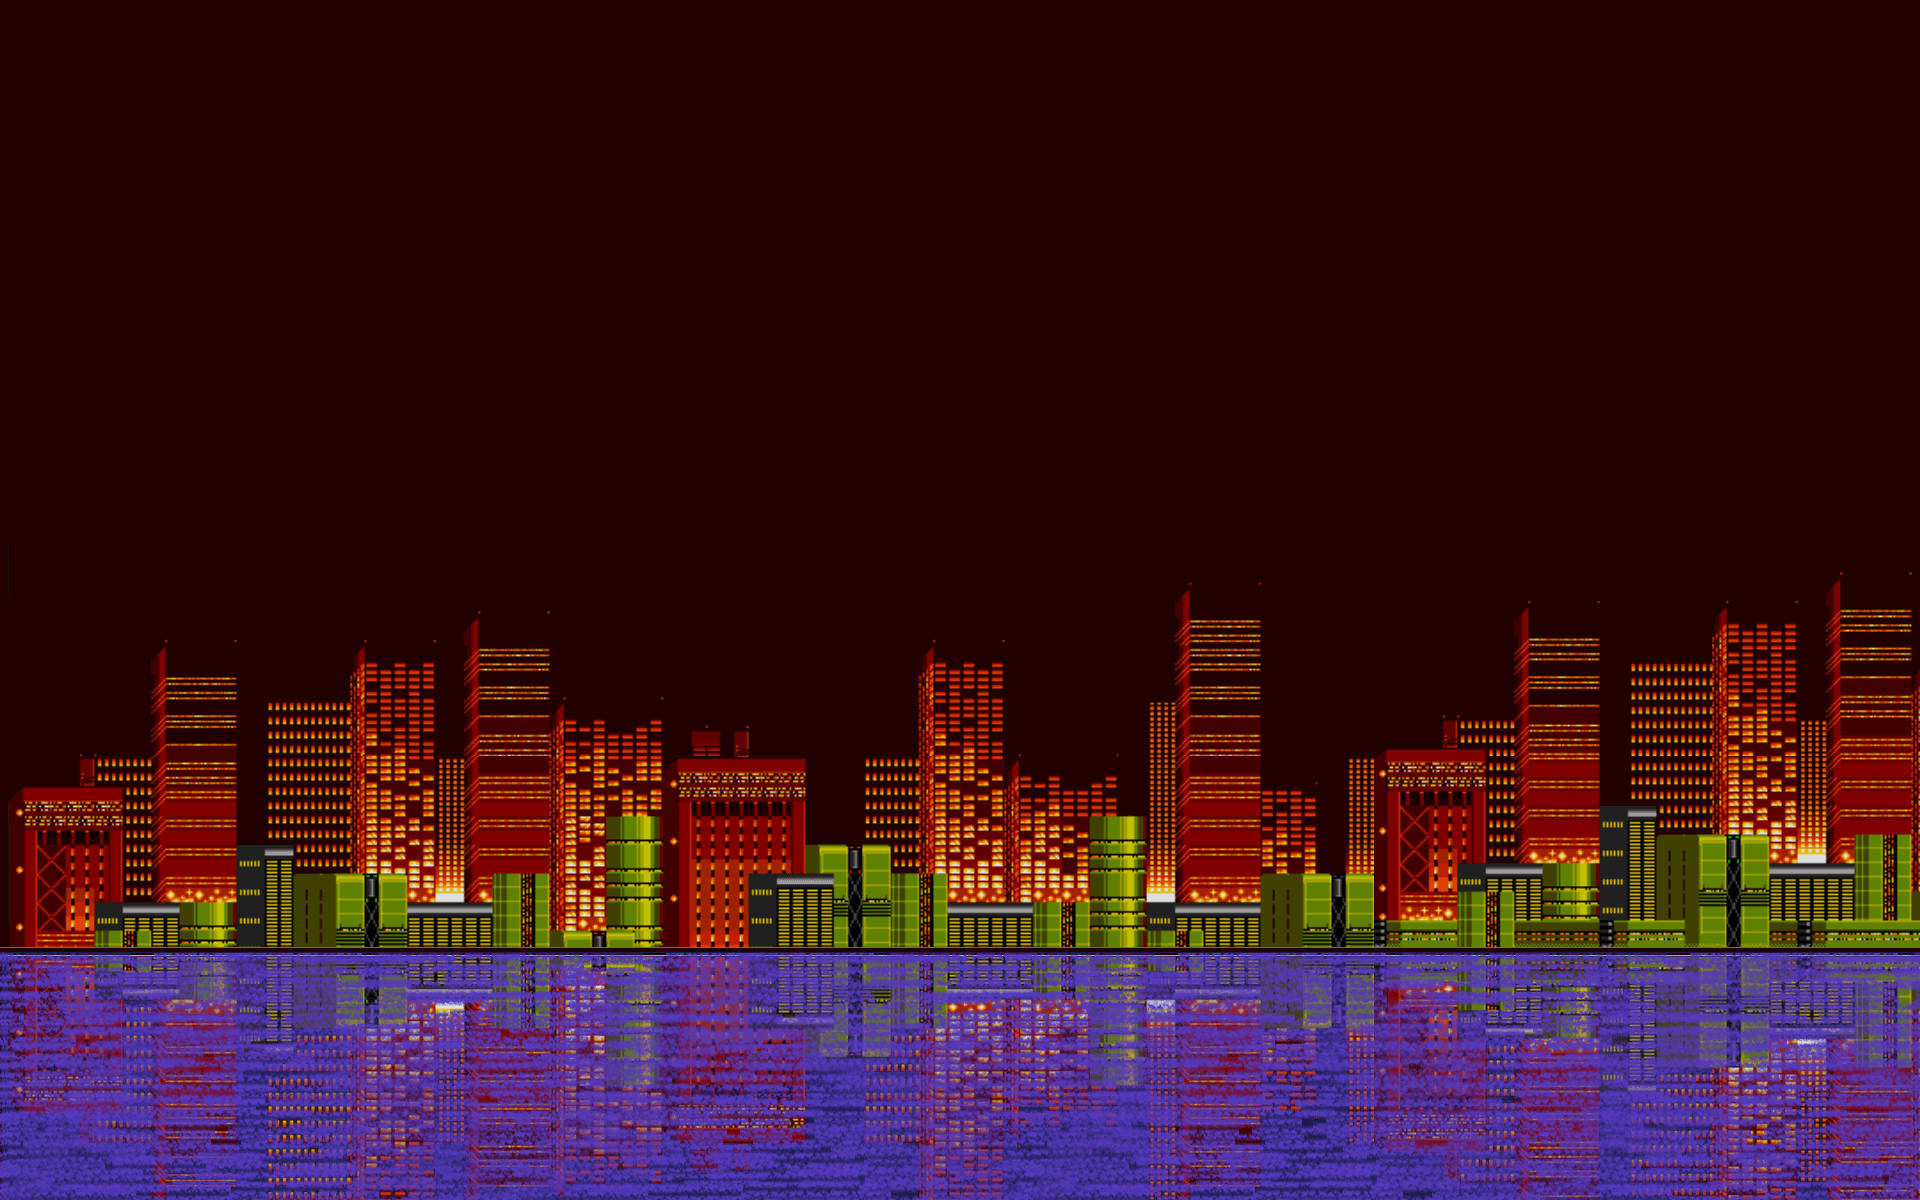 Red Tall Buildings 8 Bit Background